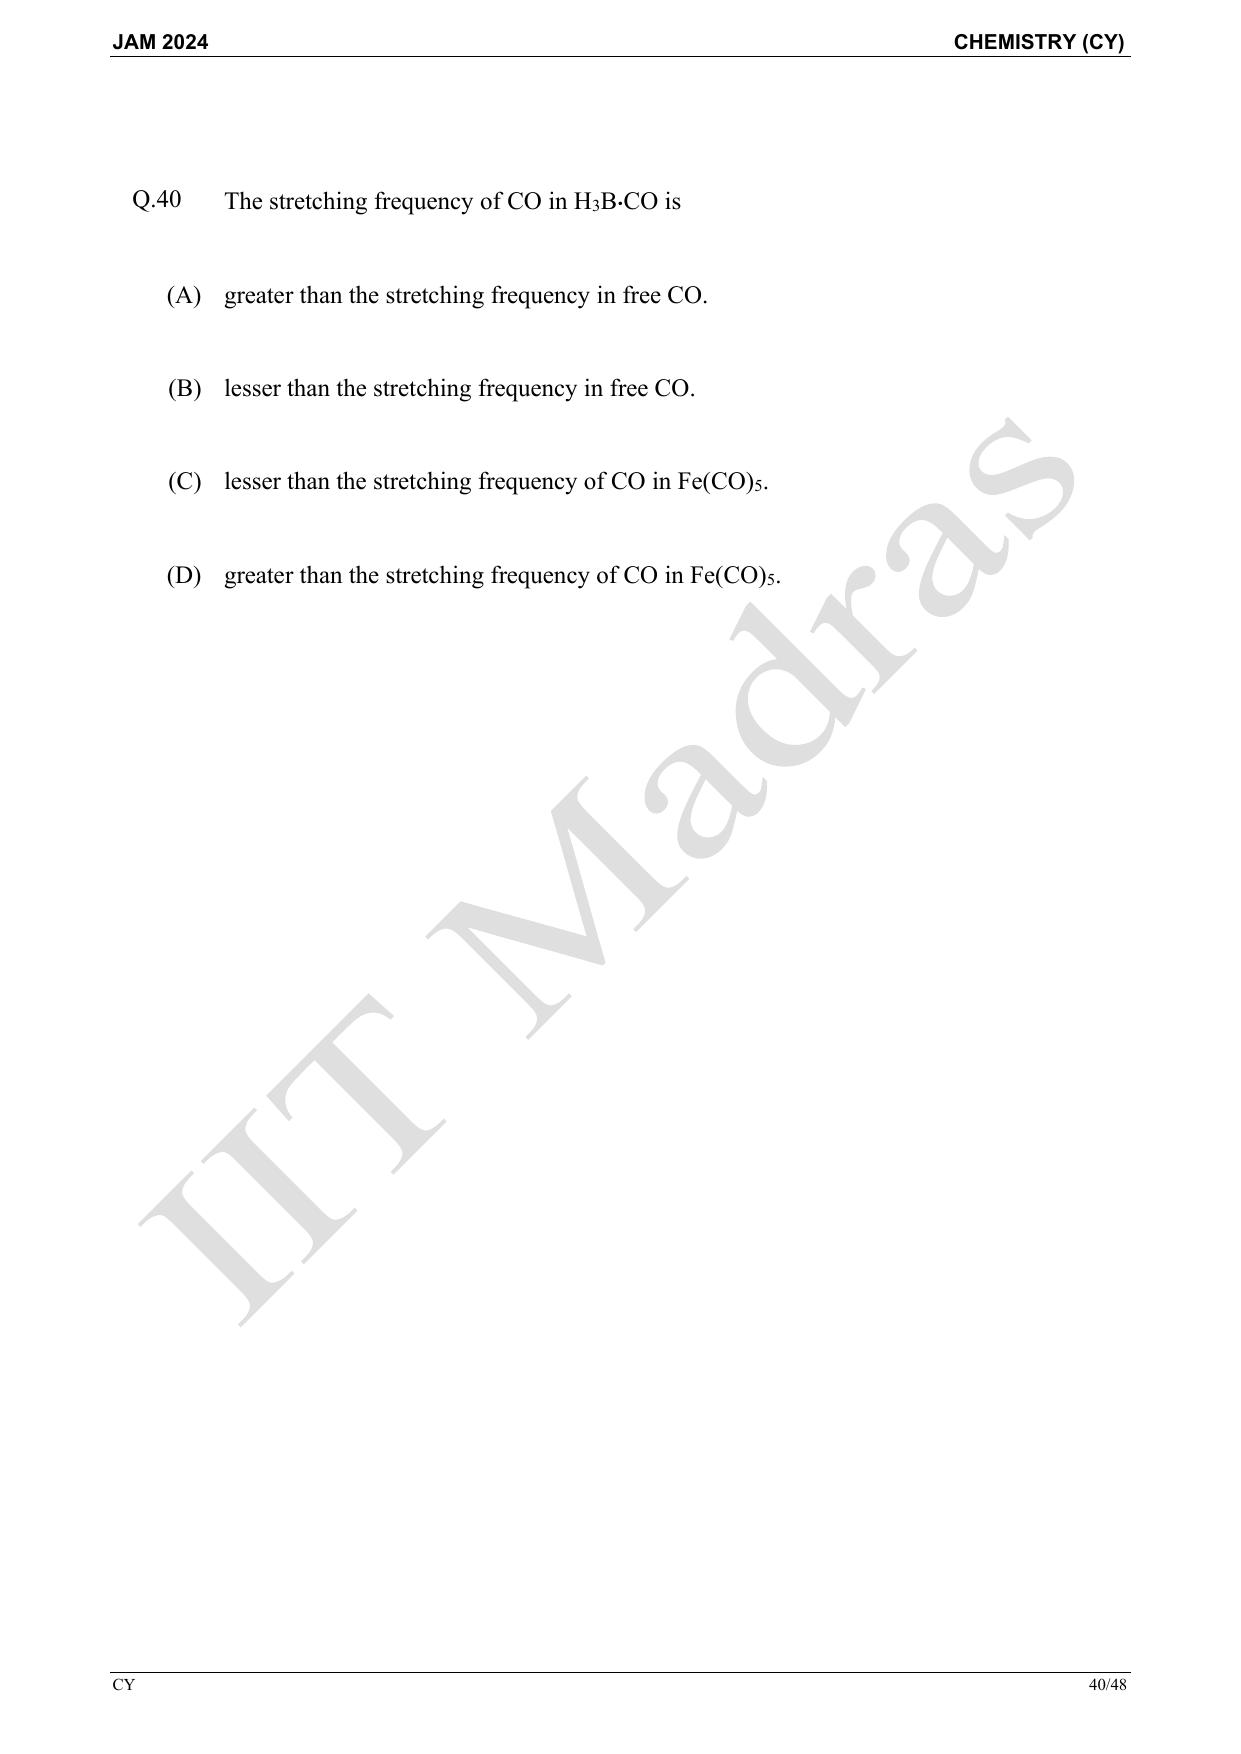 IIT JAM 2024 Chemistry (CY) Master Question Paper - Page 40